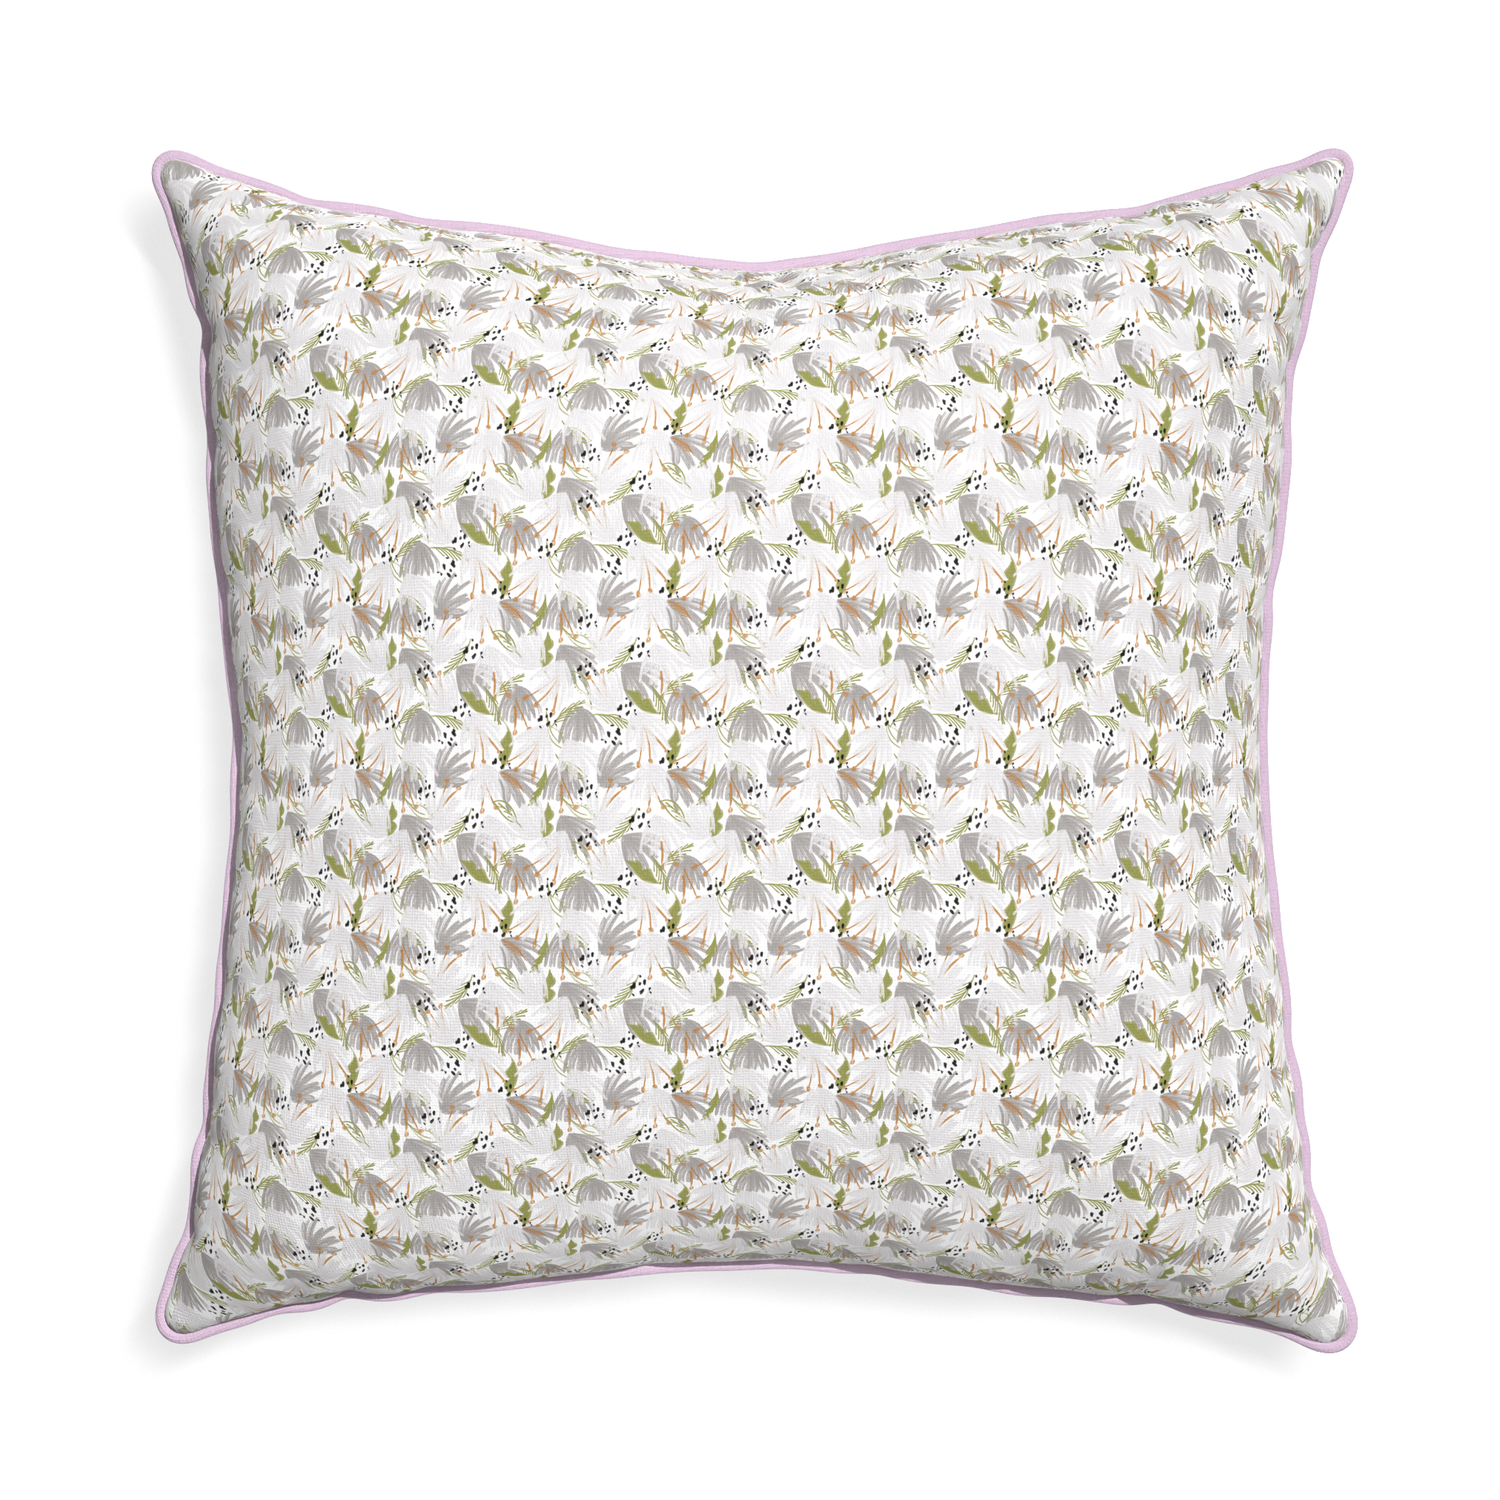 Euro-sham eden grey custom grey floralpillow with l piping on white background